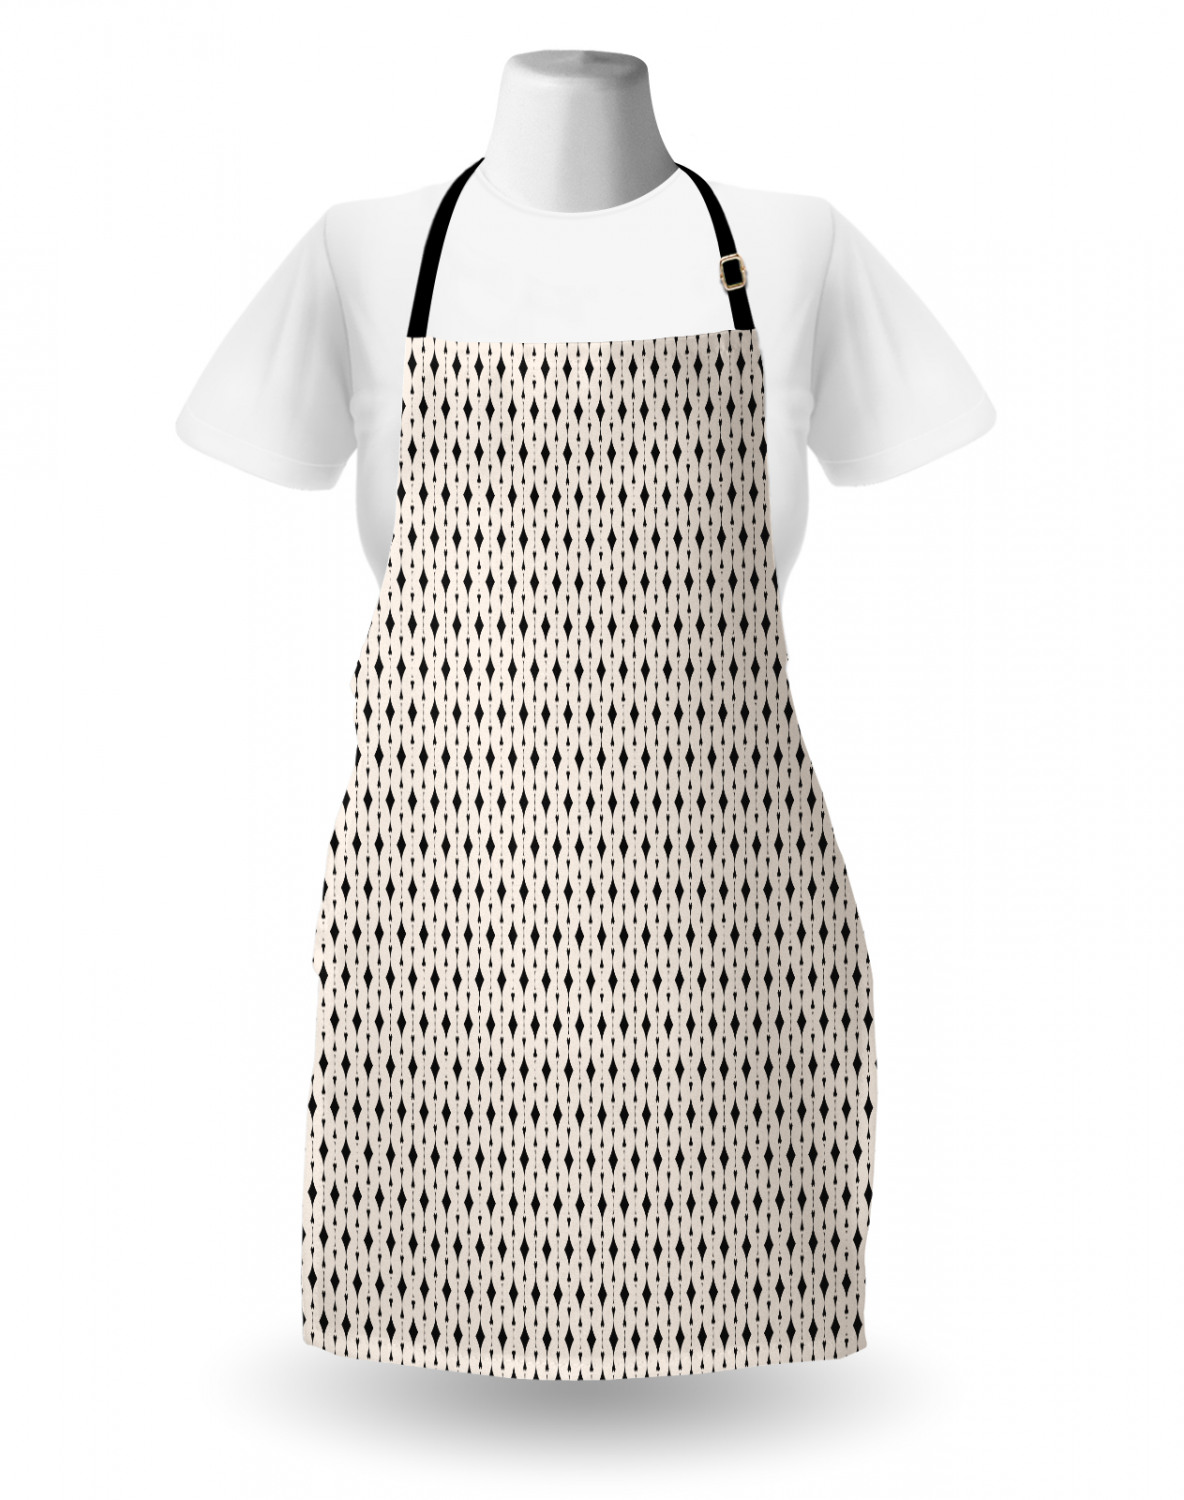 Details about   Ambesonne Standard Size Apron with Adjustable Black Strap for Gardening Cooking 